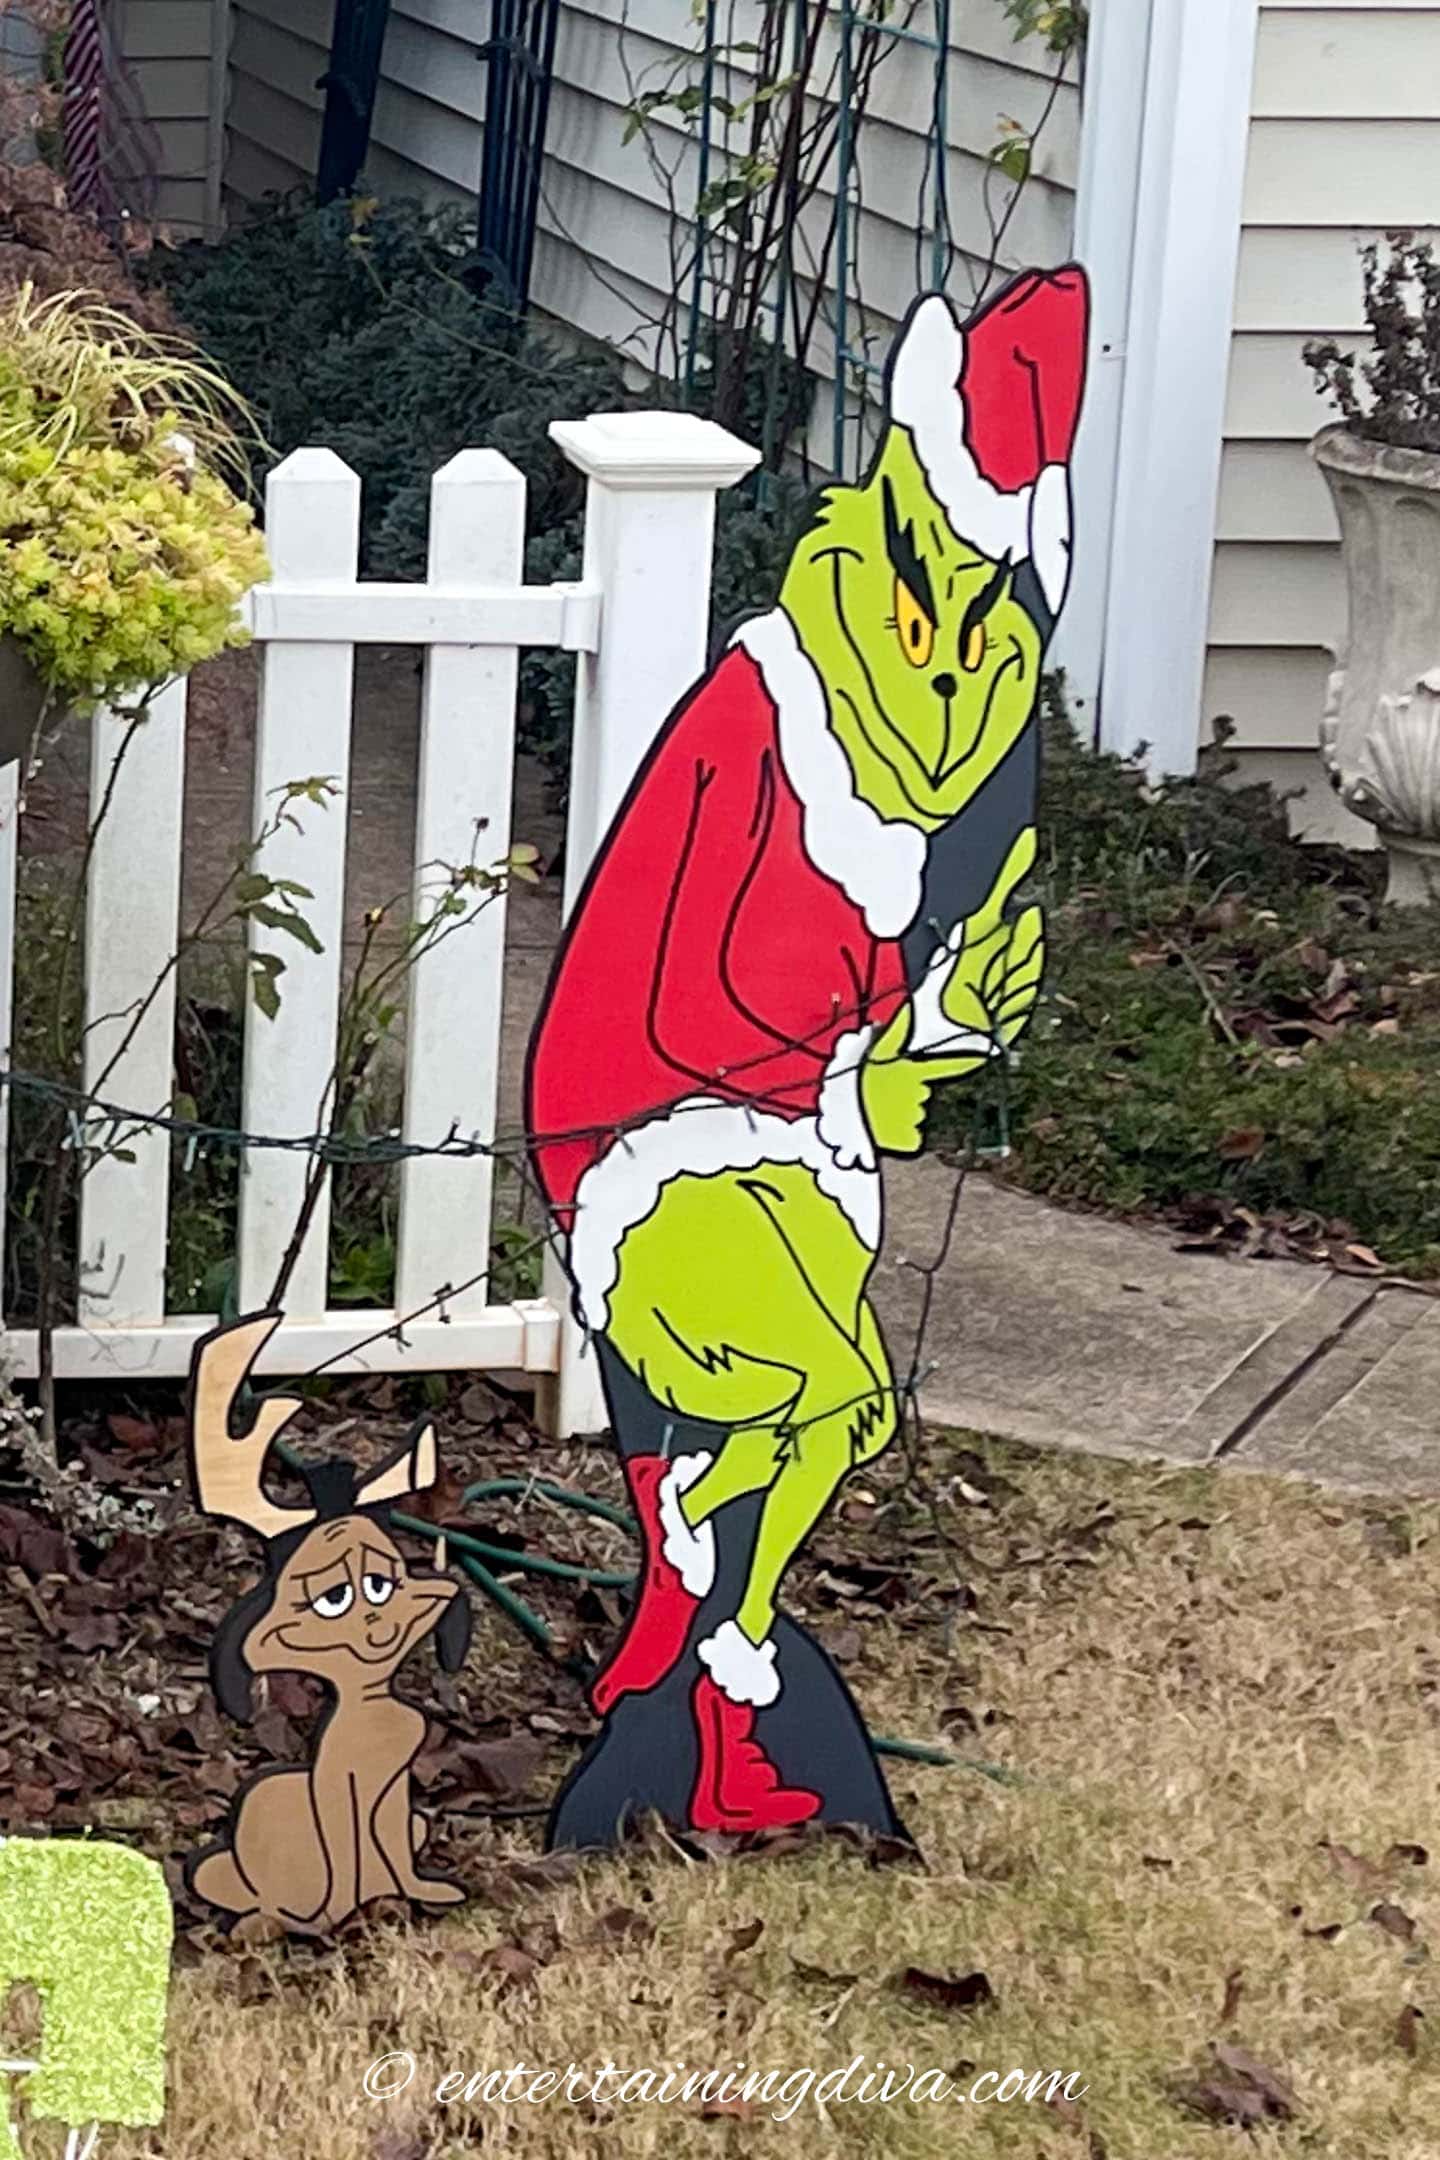 Grinch stealing lights during the day